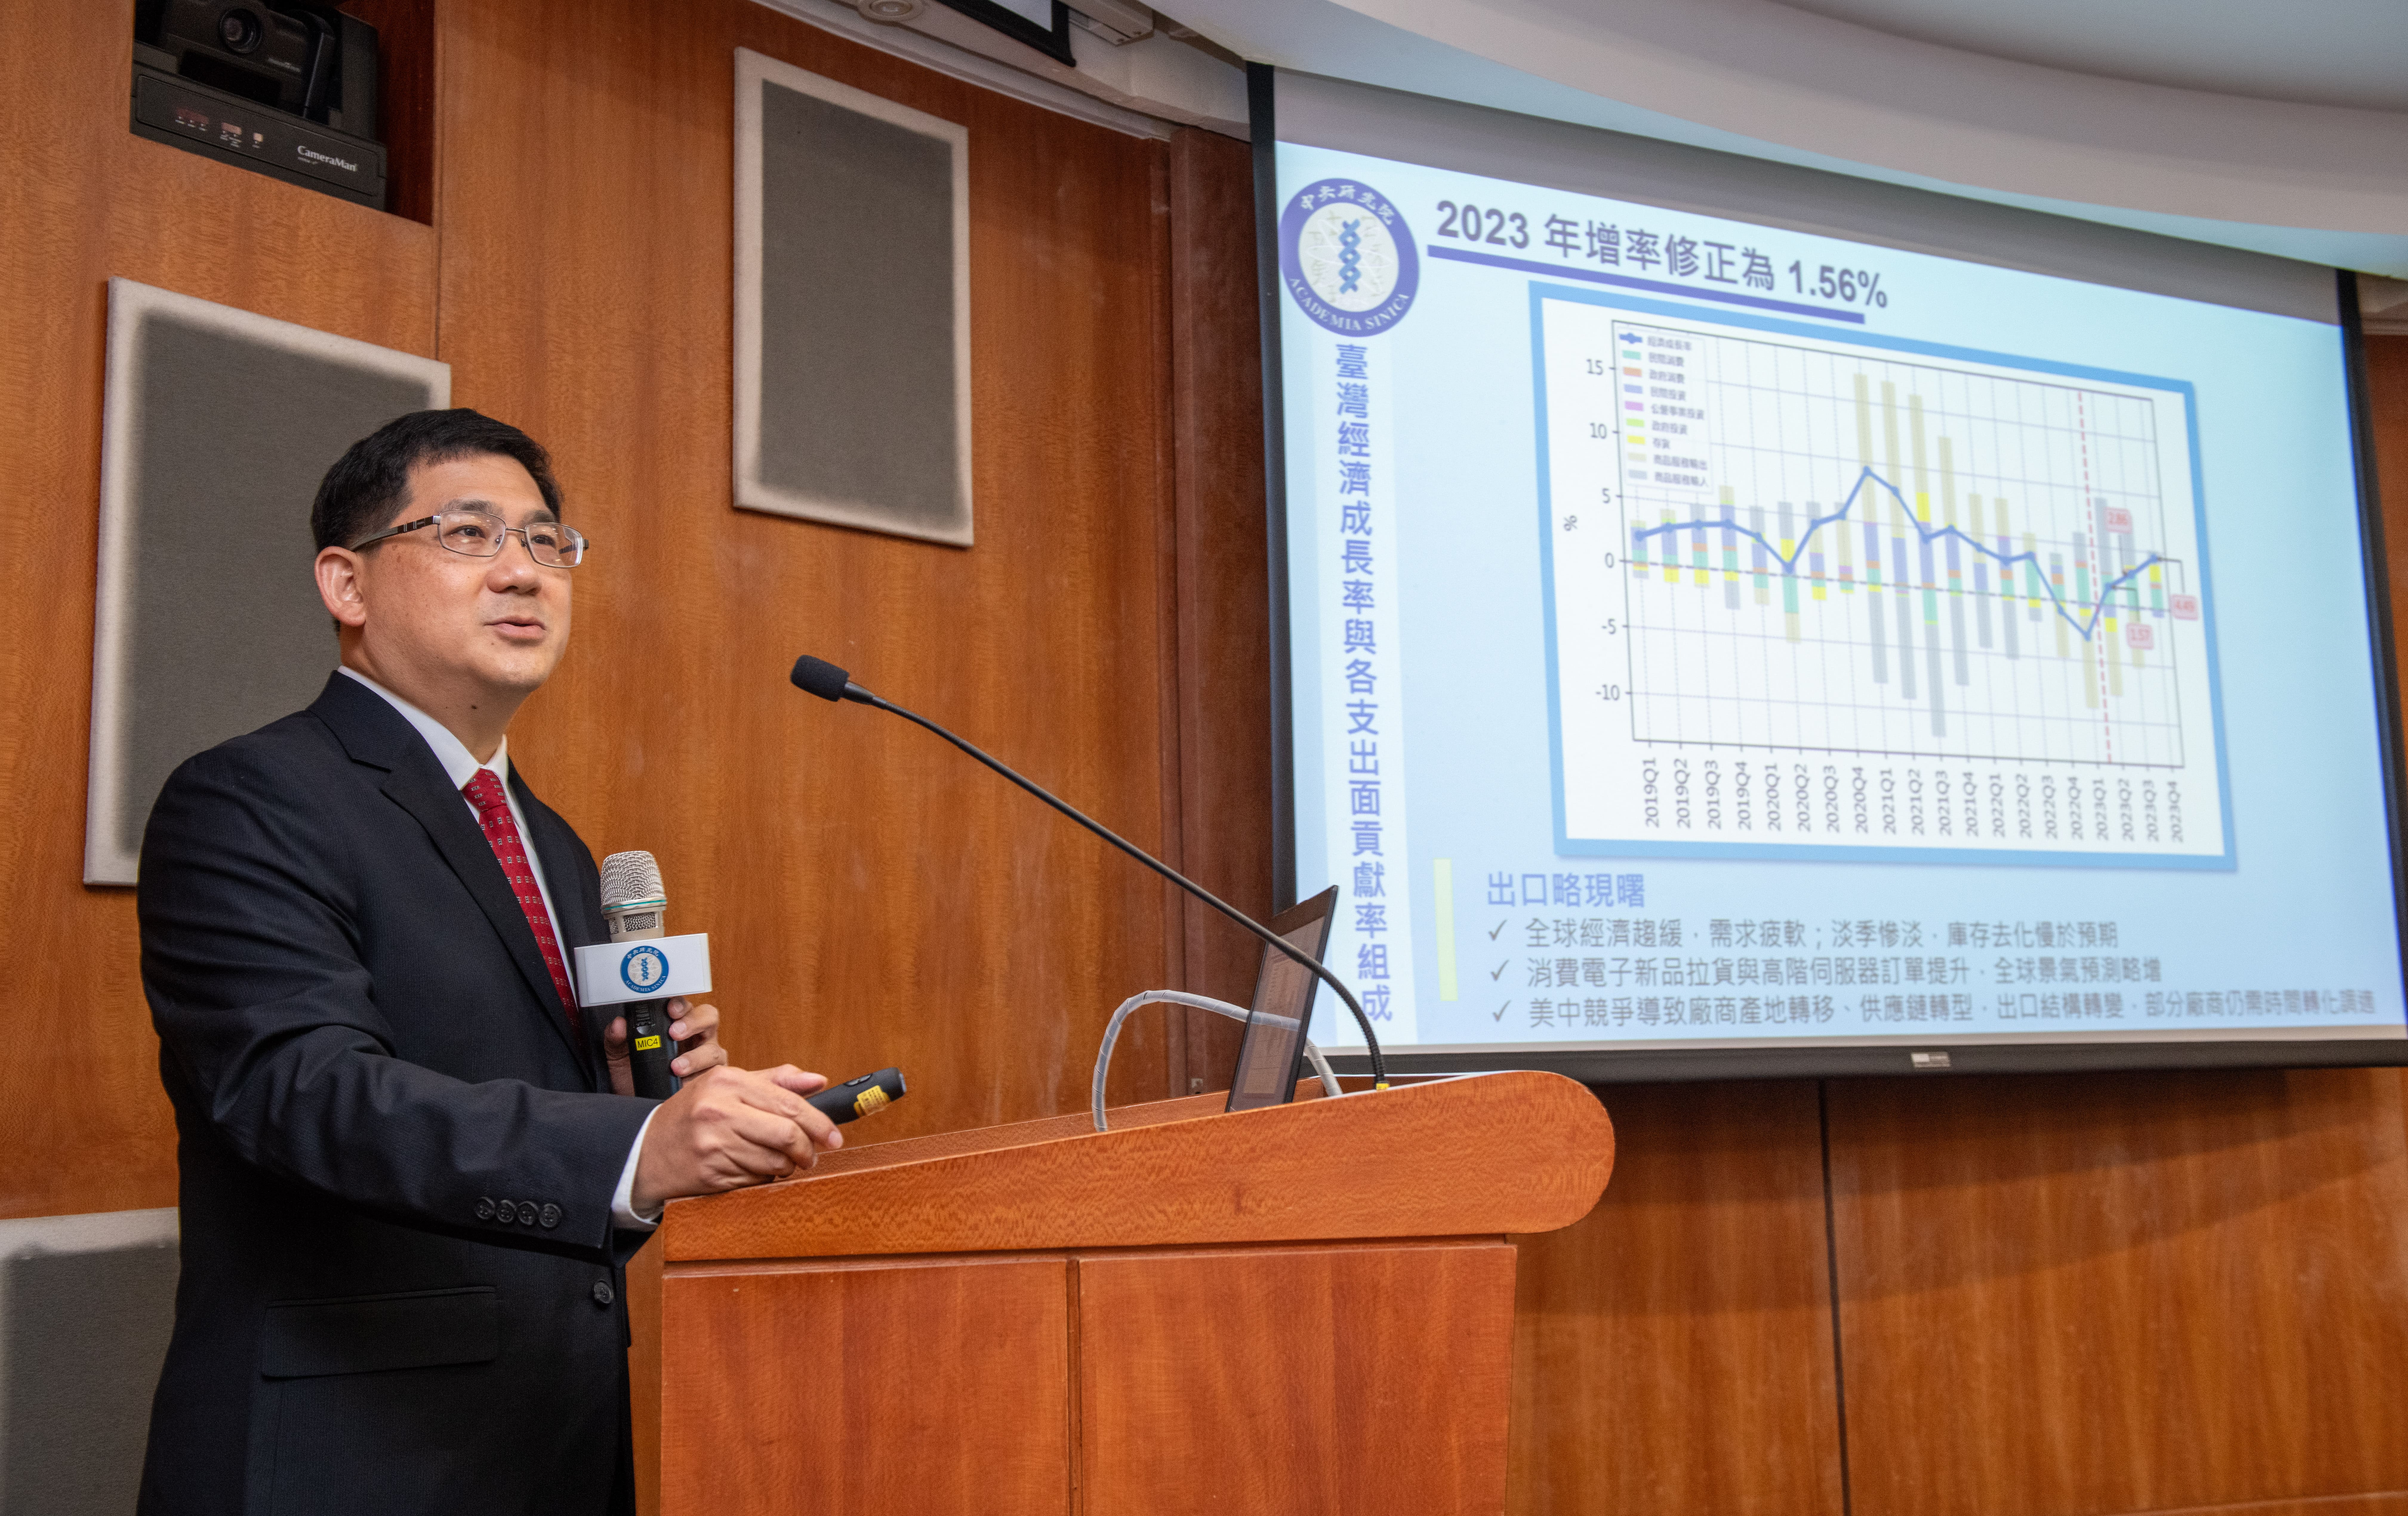 【Press Releases】2023 Taiwan Economic Forecast: A Revision-Resilient Consumption amid Weak Signs of Export Recovery